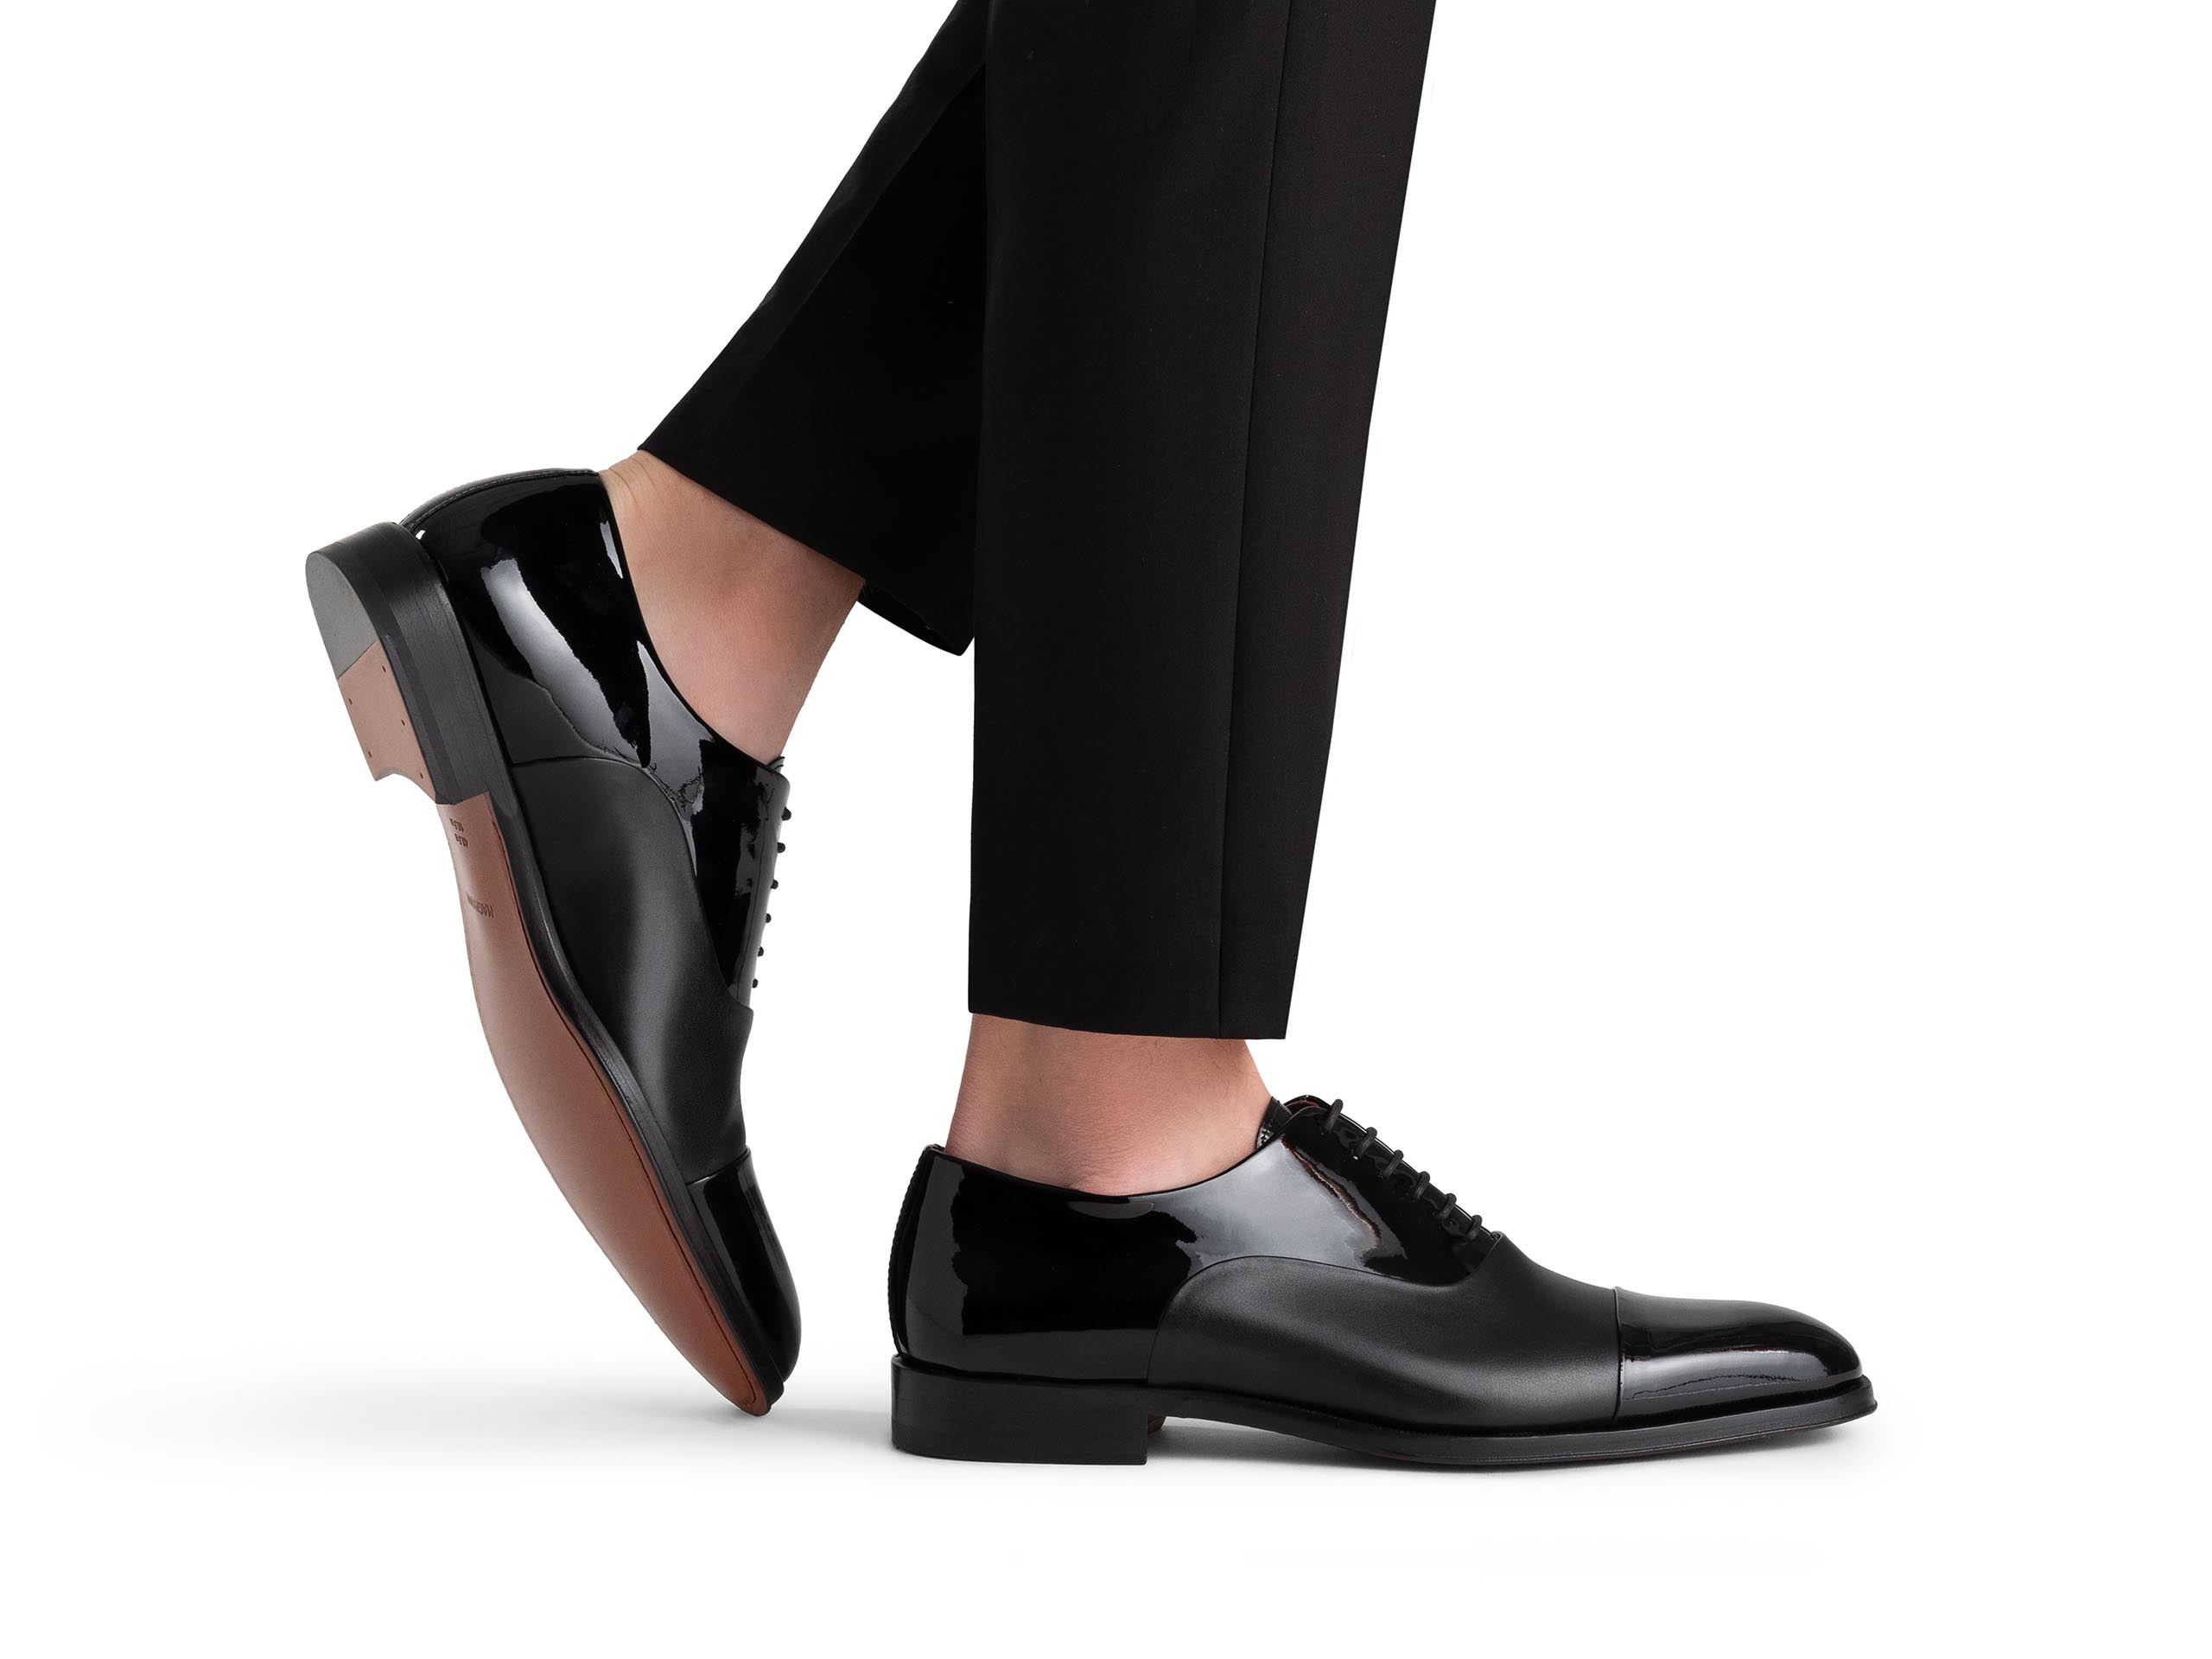 The Cesar Black pairs well with black pants